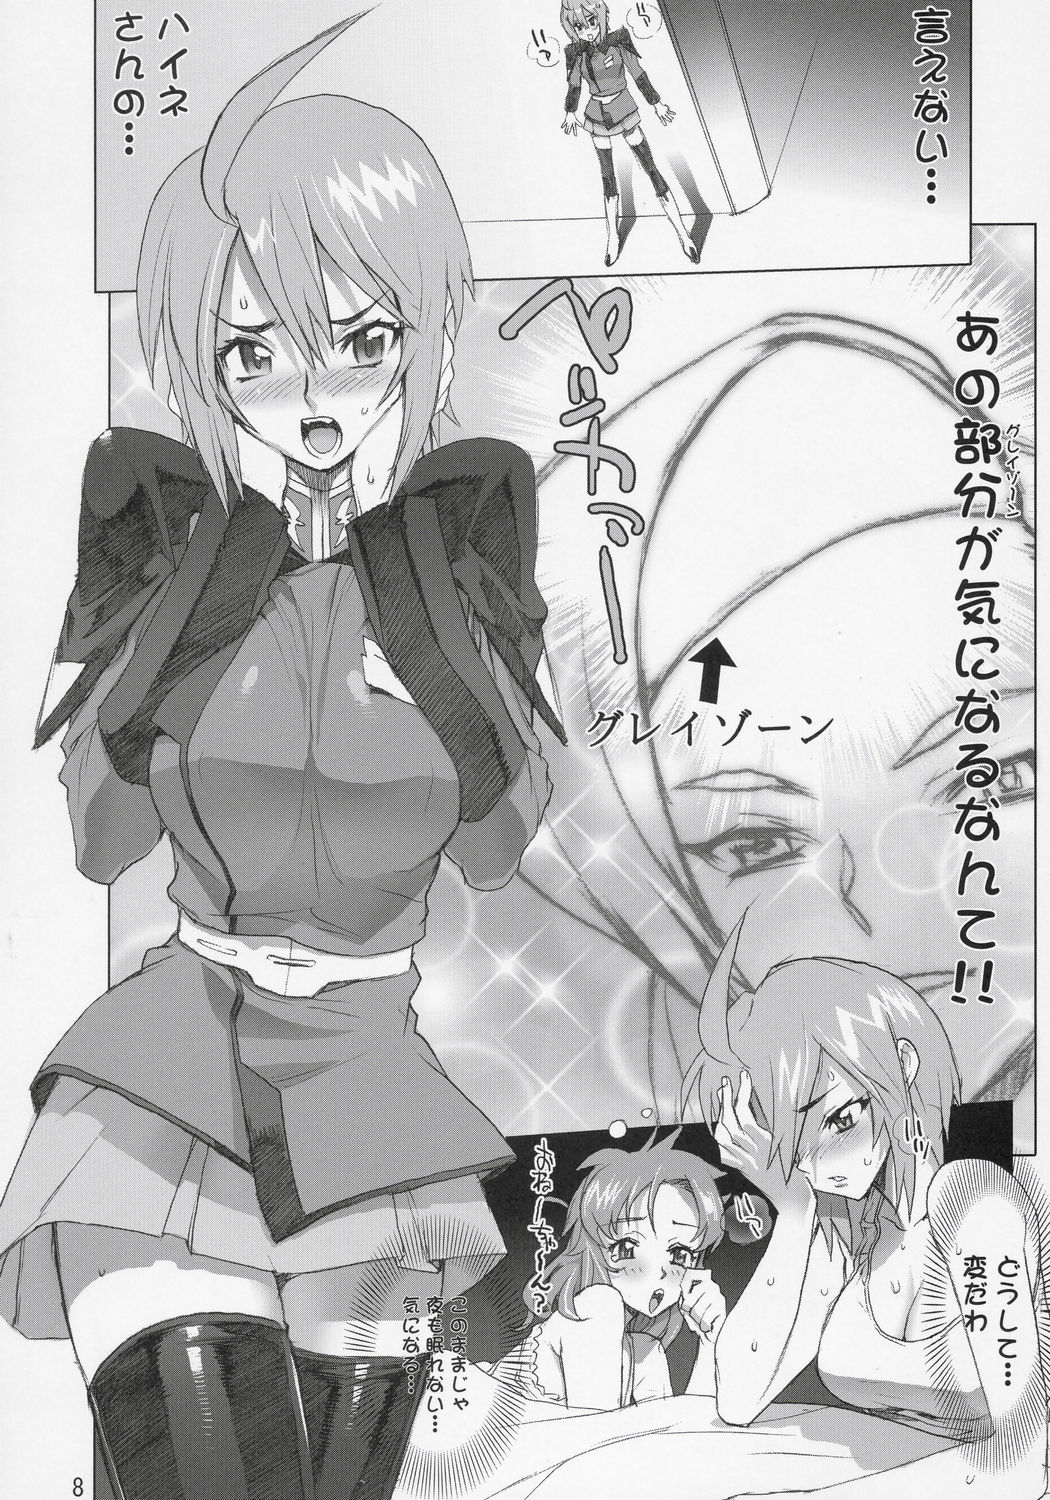 (C69) [Digital Accel Works] Inazuma Warrior 2 (Various) page 7 full